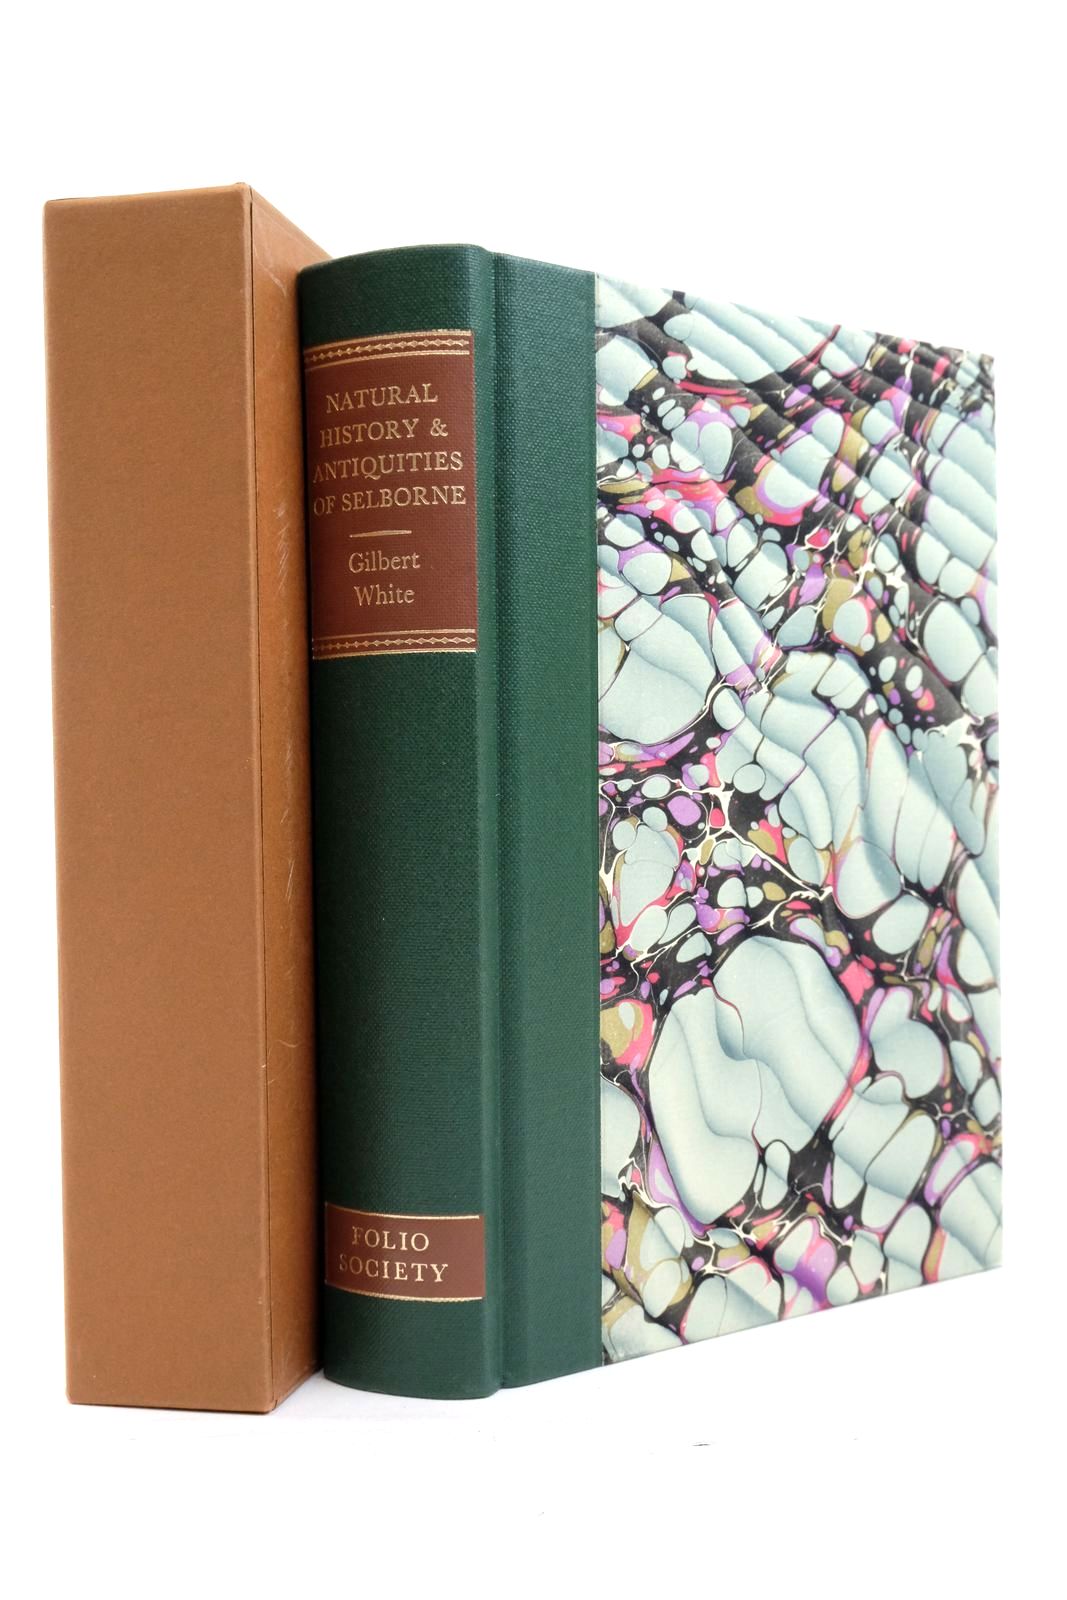 Photo of THE NATURAL HISTORY AND ANTIQUITIES OF SELBORNE written by White, Gilbert Niall, Ian illustrated by Wormell, Christopher published by Folio Society (STOCK CODE: 2138215)  for sale by Stella & Rose's Books